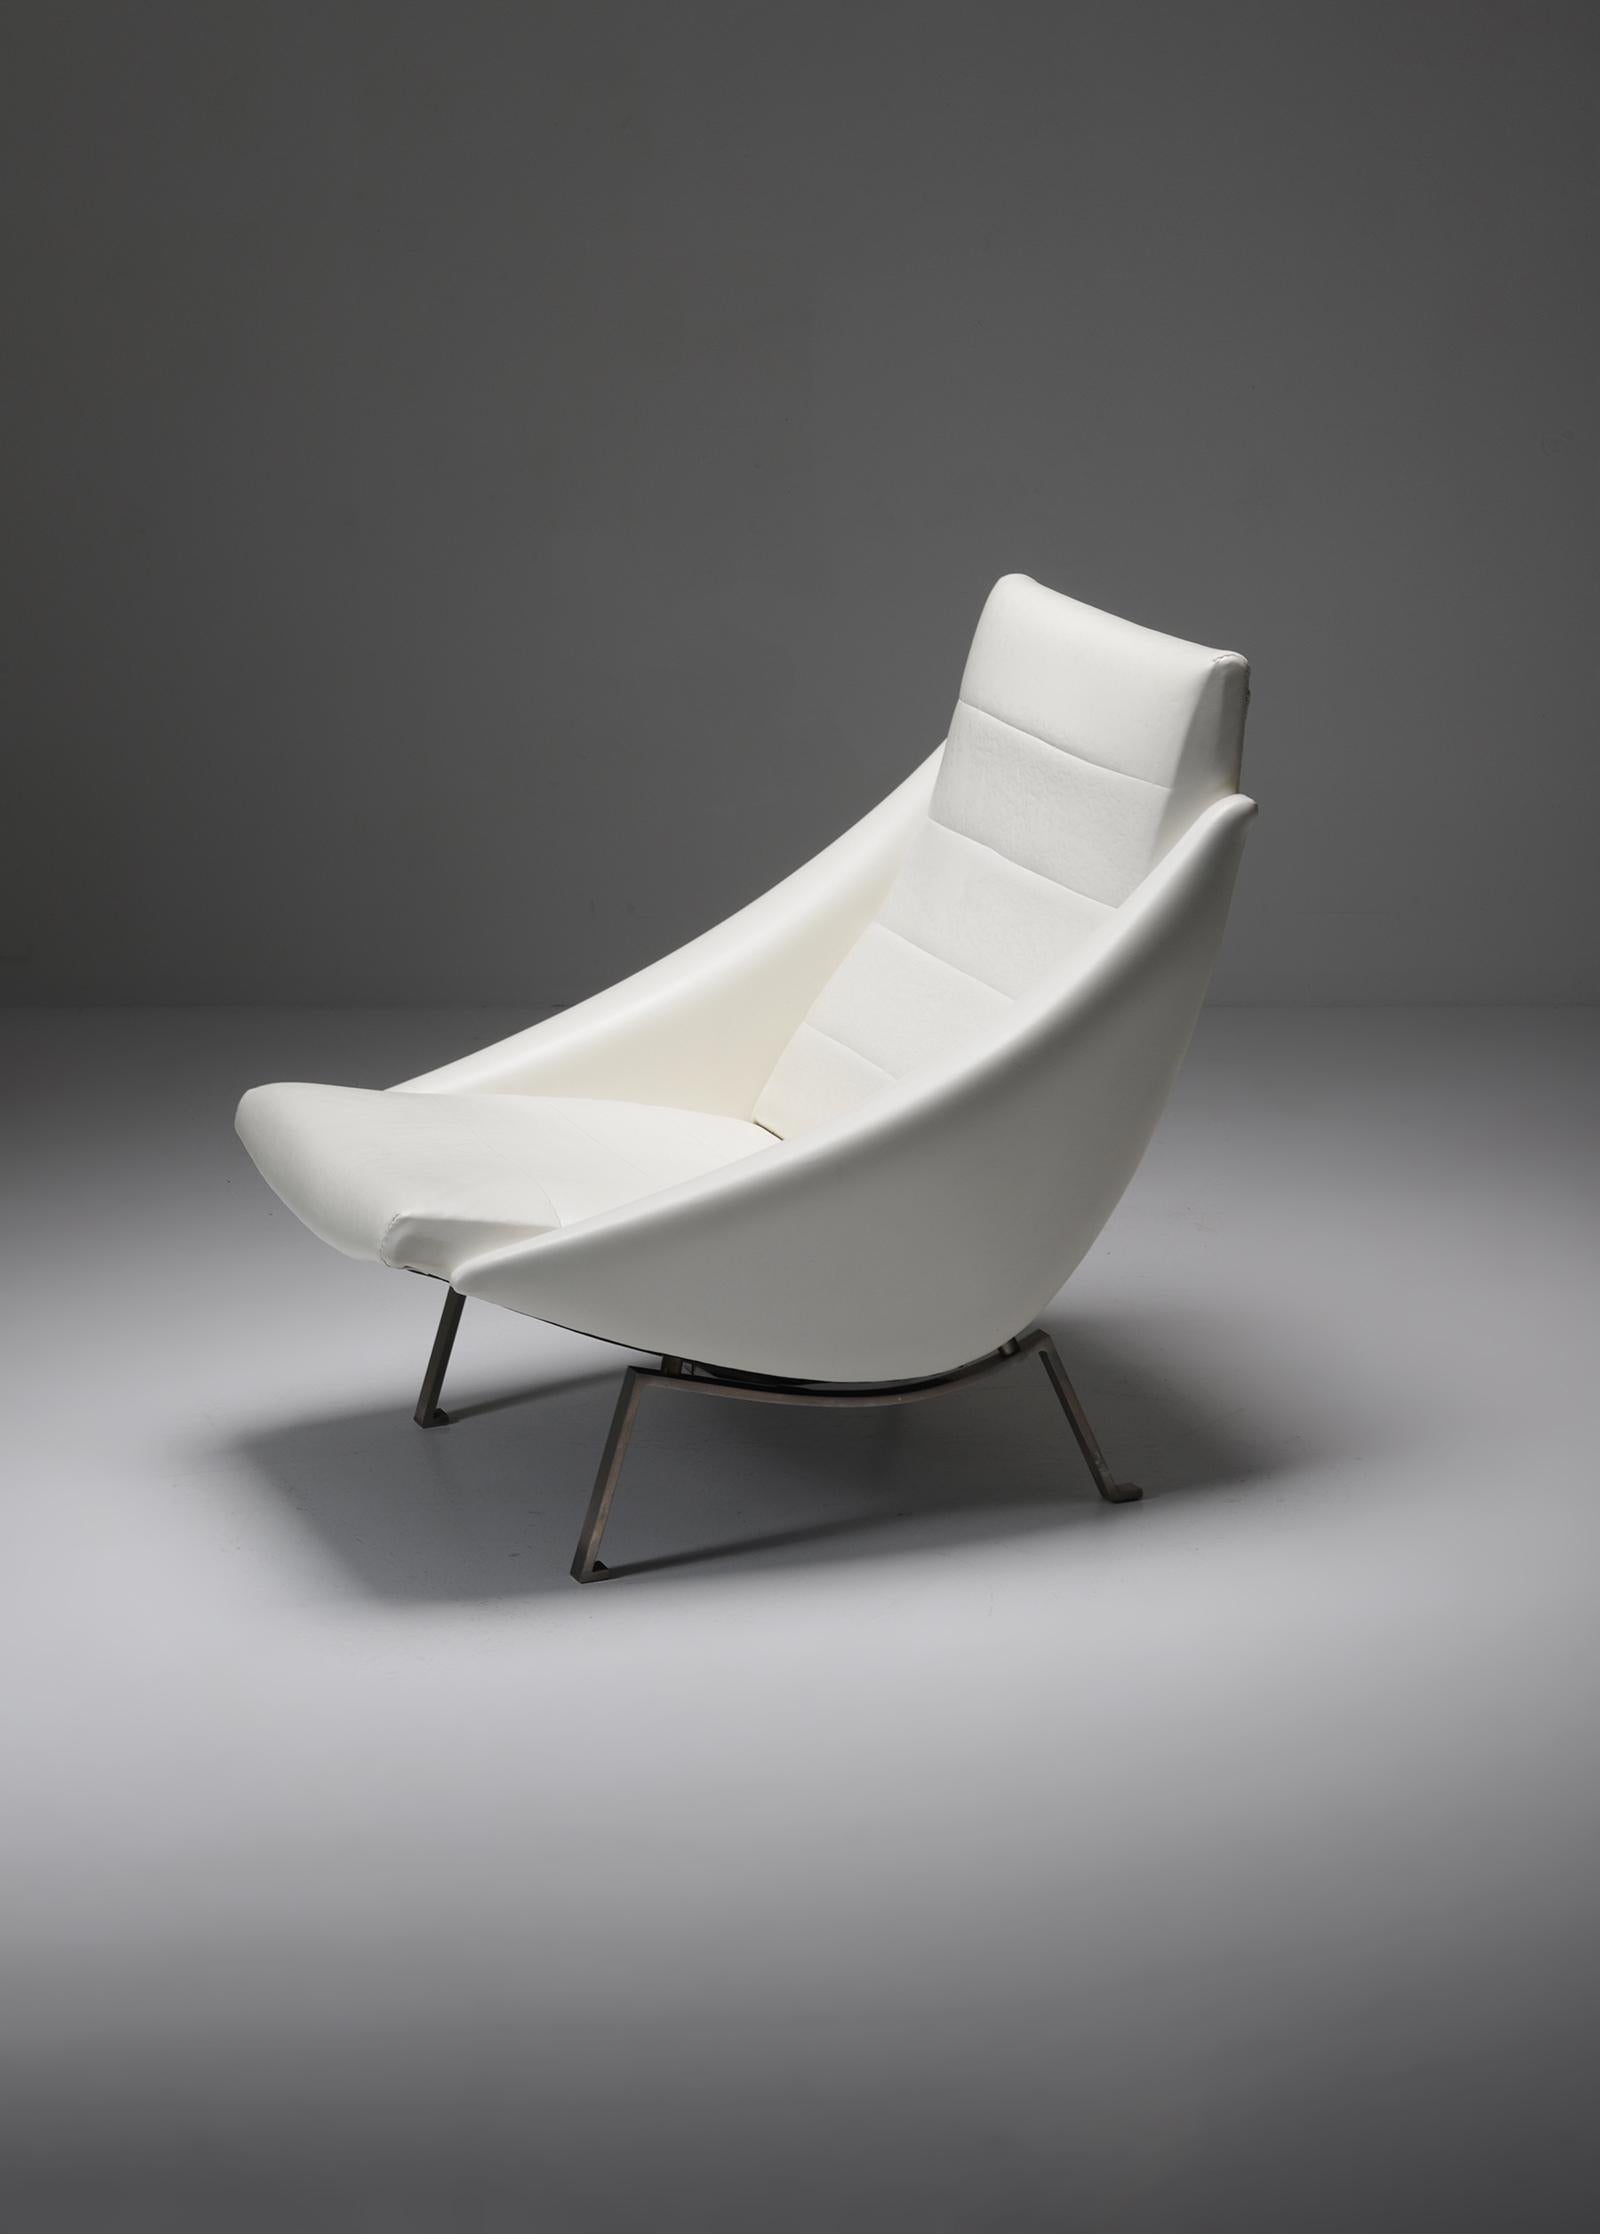 Rare Mid-Century Modernist Lounge Chair in White Original Viny 1950 For Sale 4